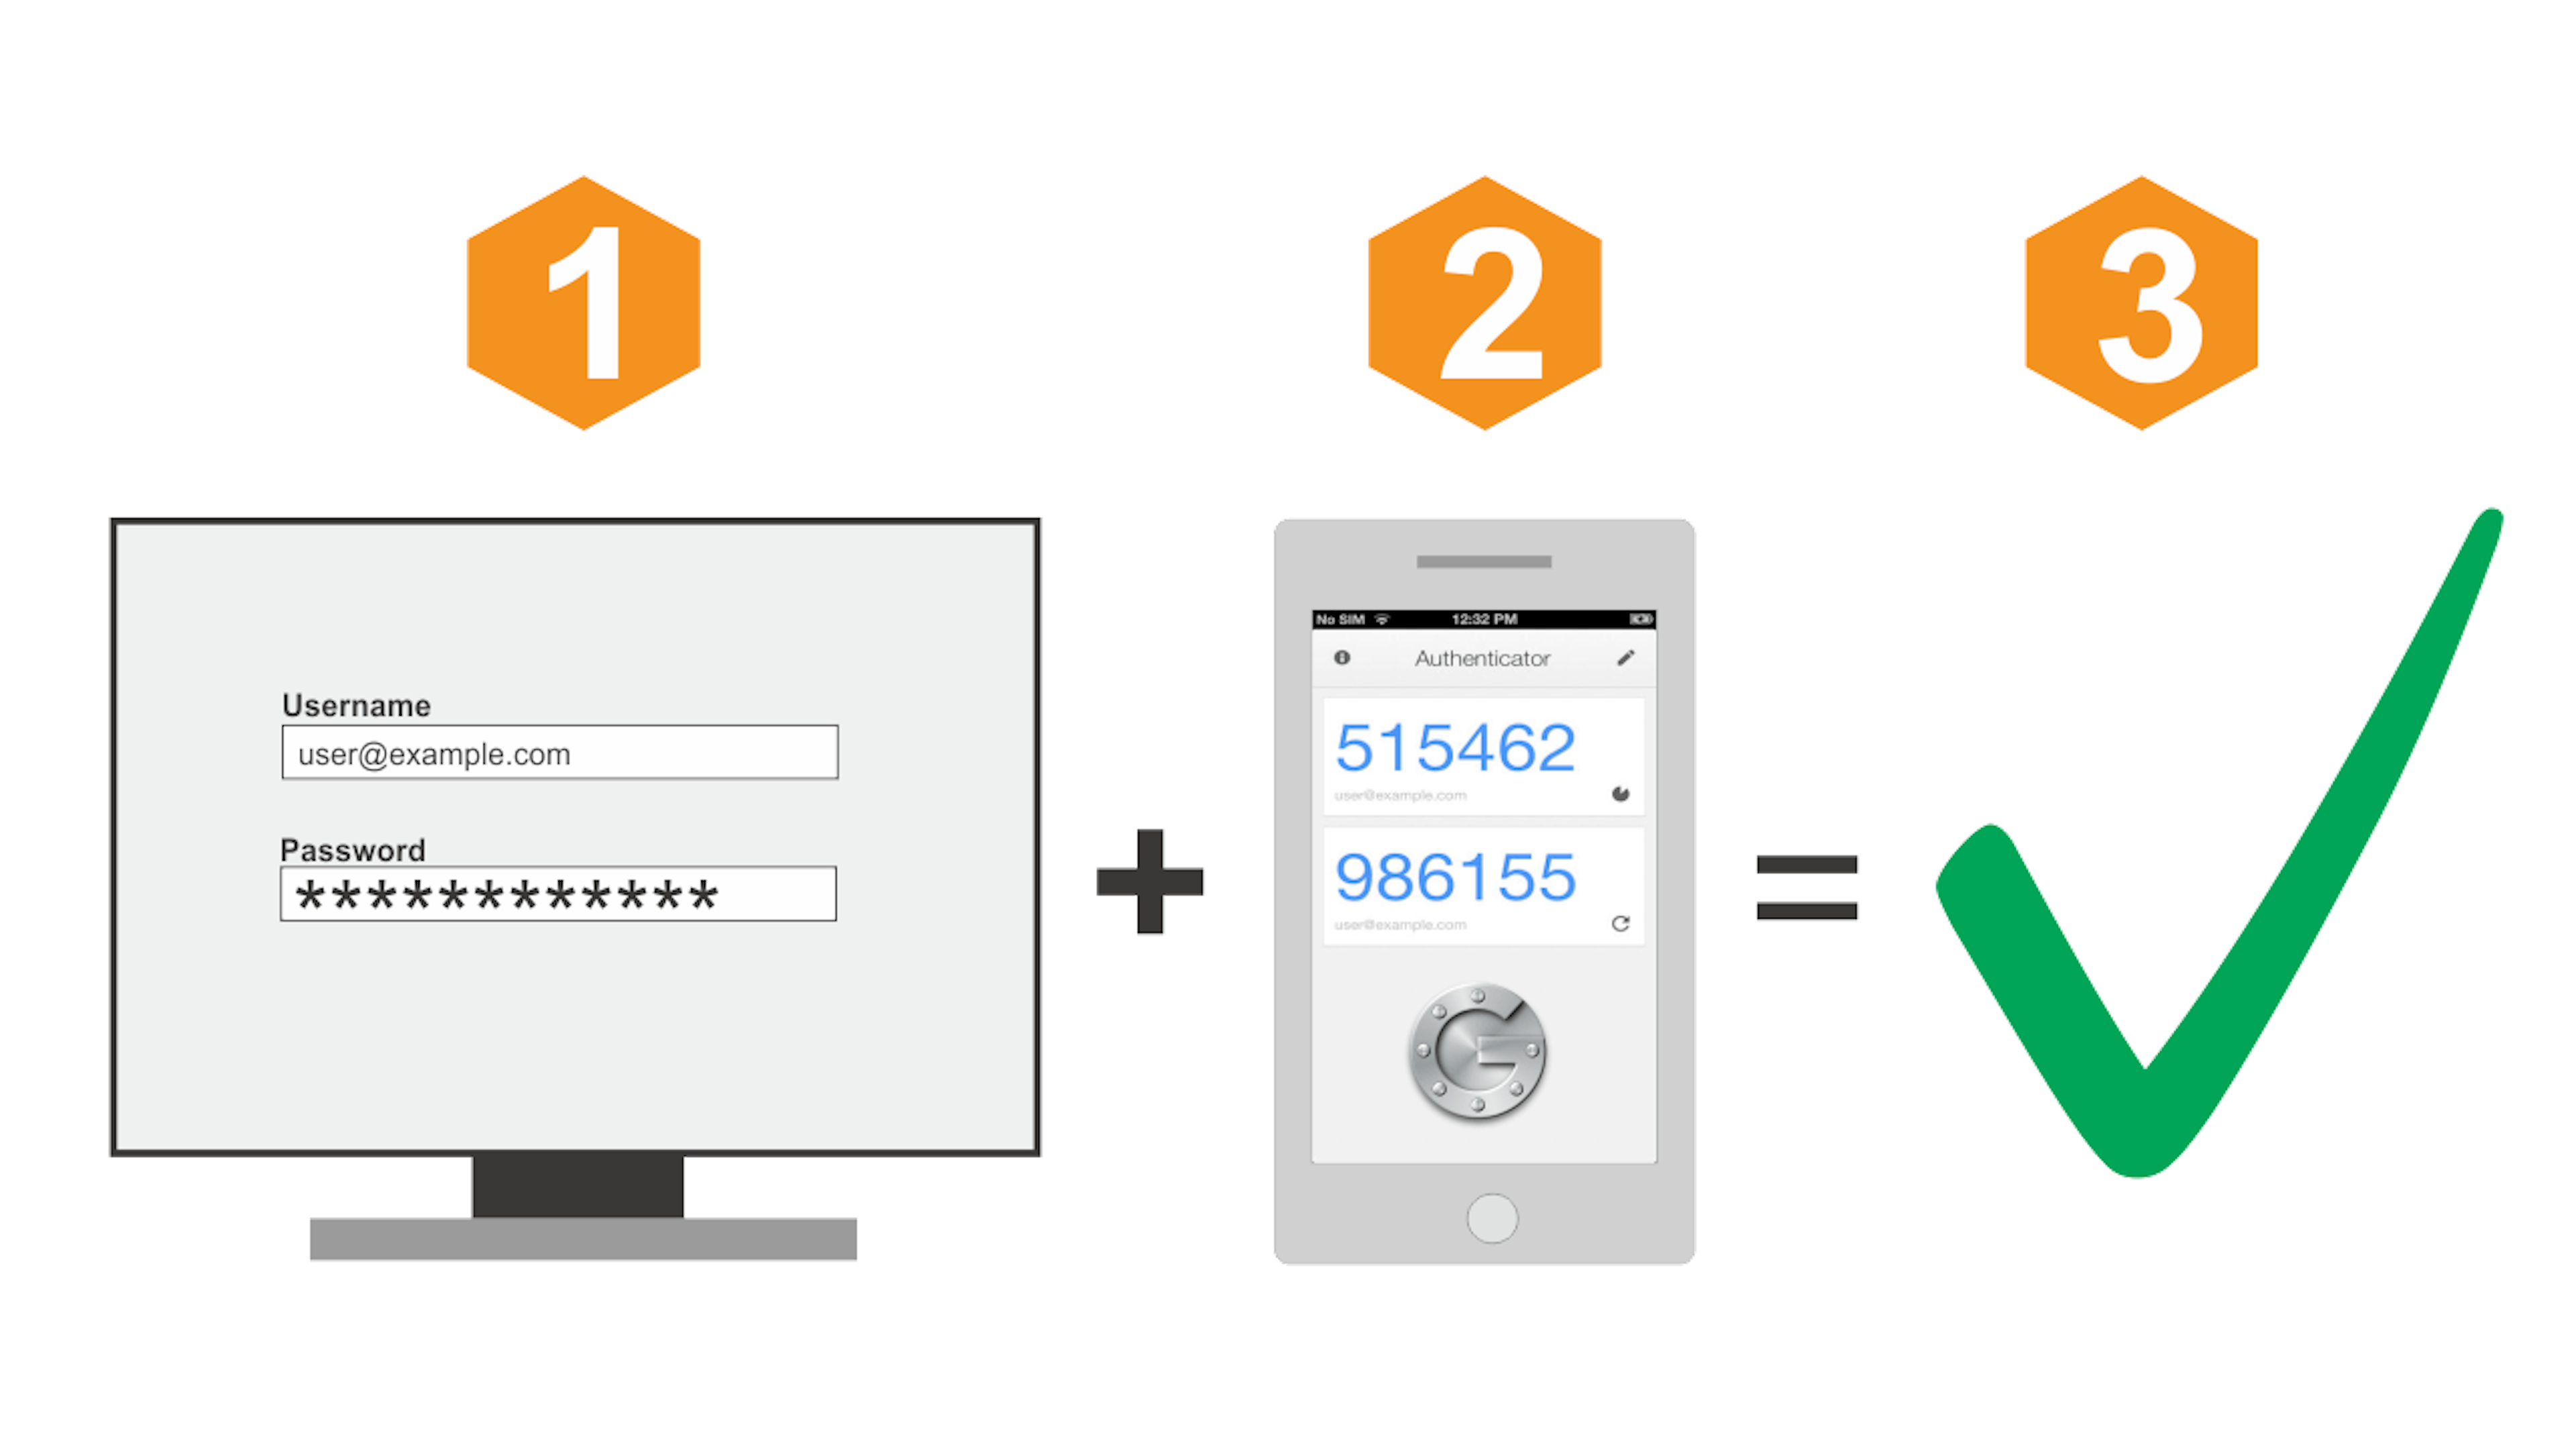 An illustration of the concept of Two-Factor Authentication (2FA) process